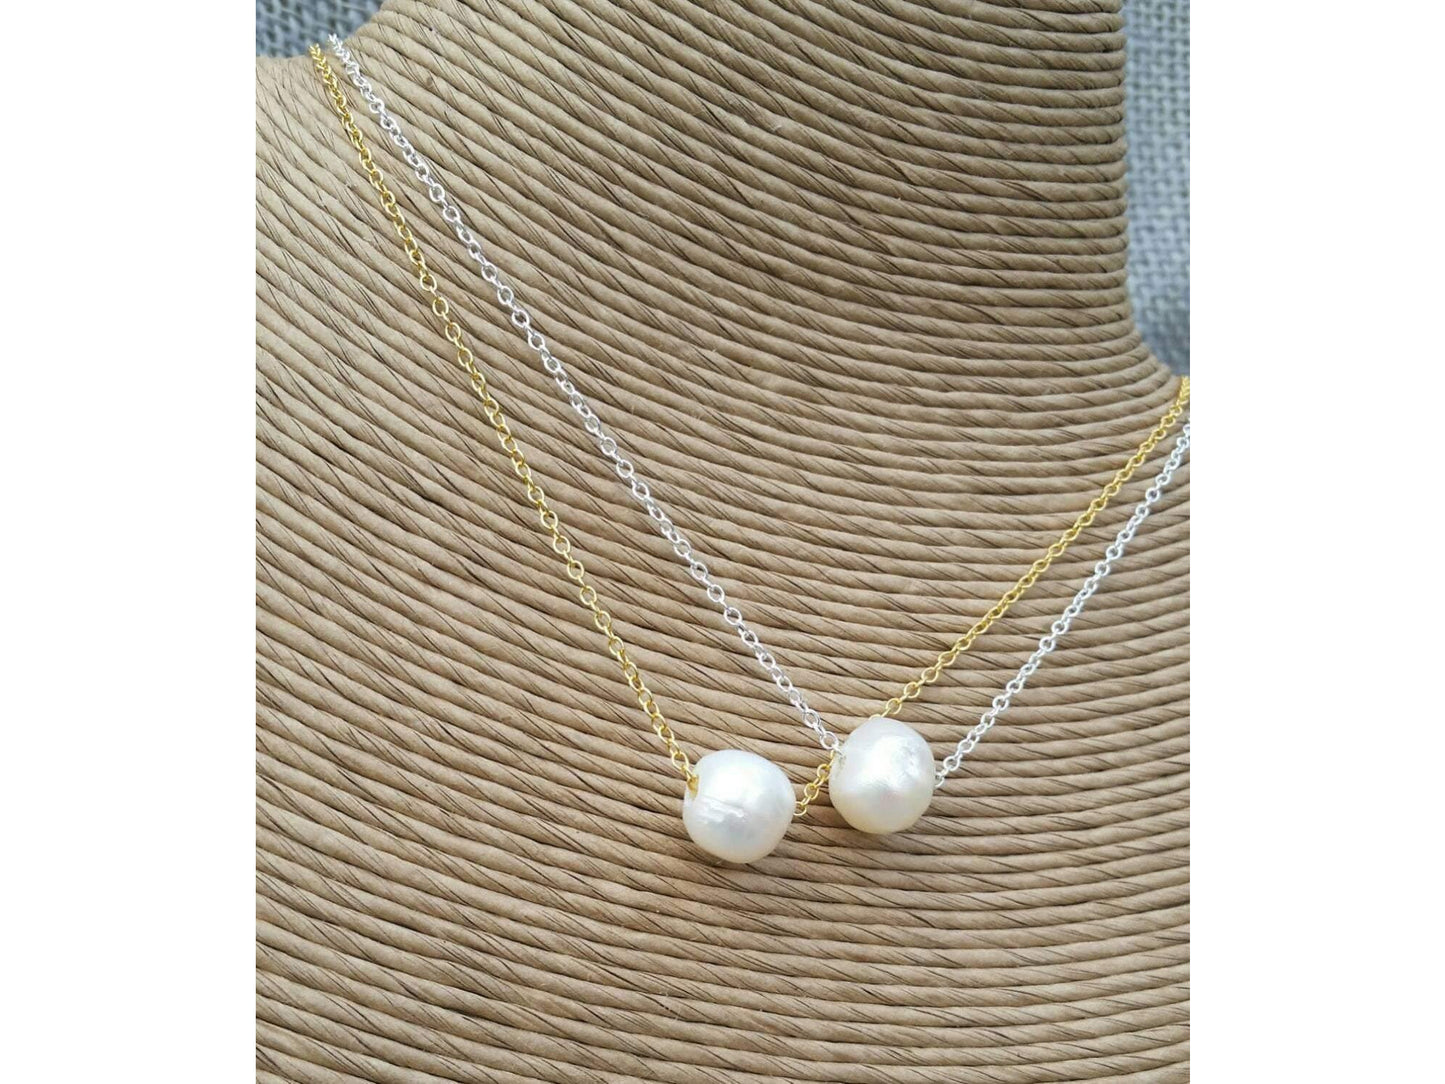 Floating pearl necklace, real pearl choker, wedding party jewelry, single pearl necklace, Bridal party jewelry